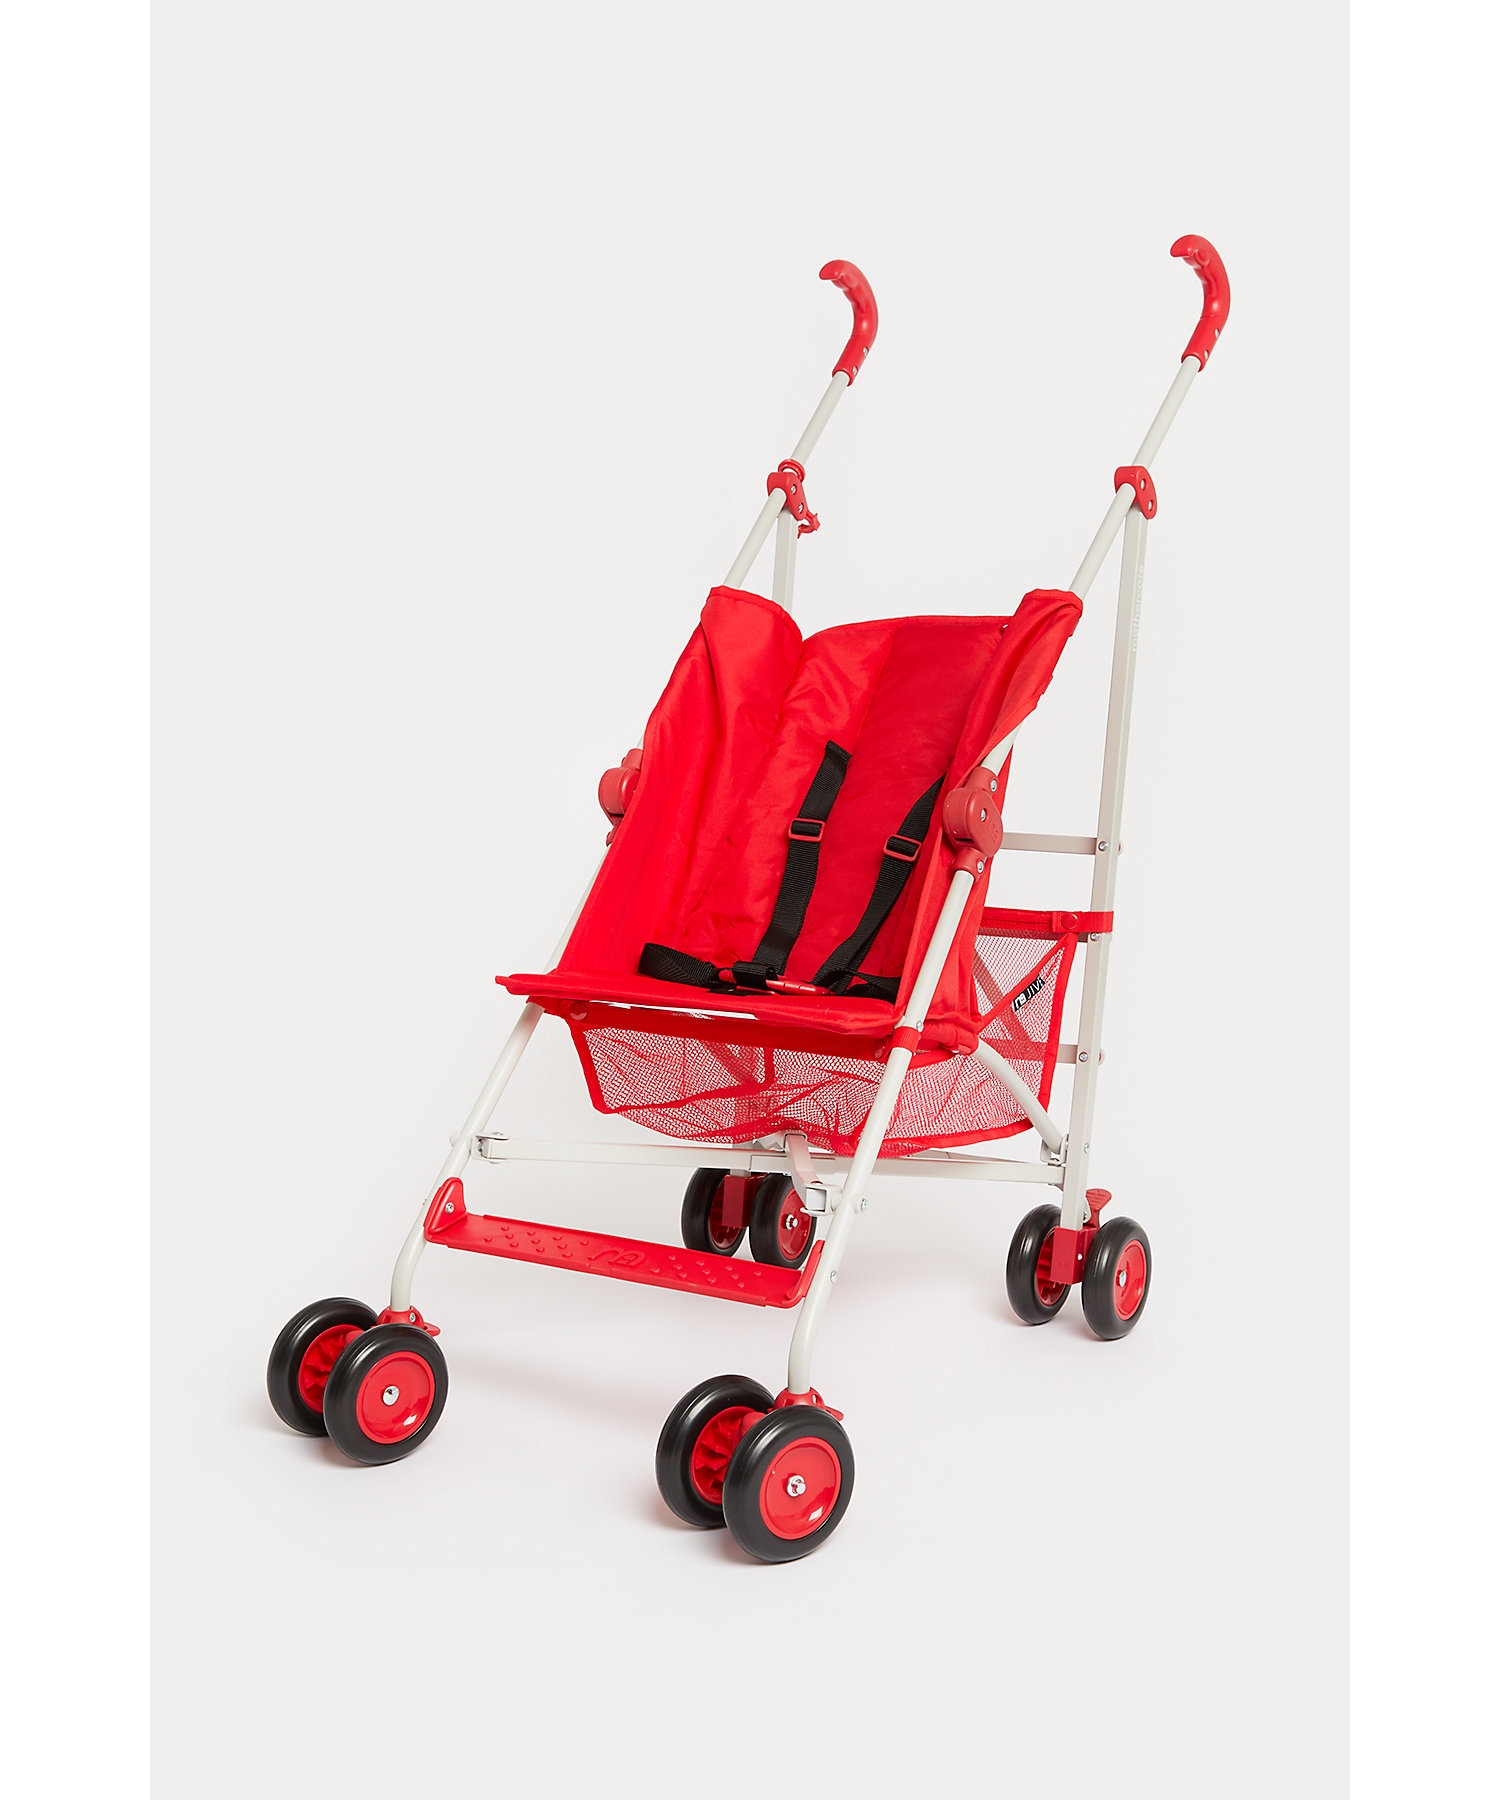 Mothercare Jive Stroller Red